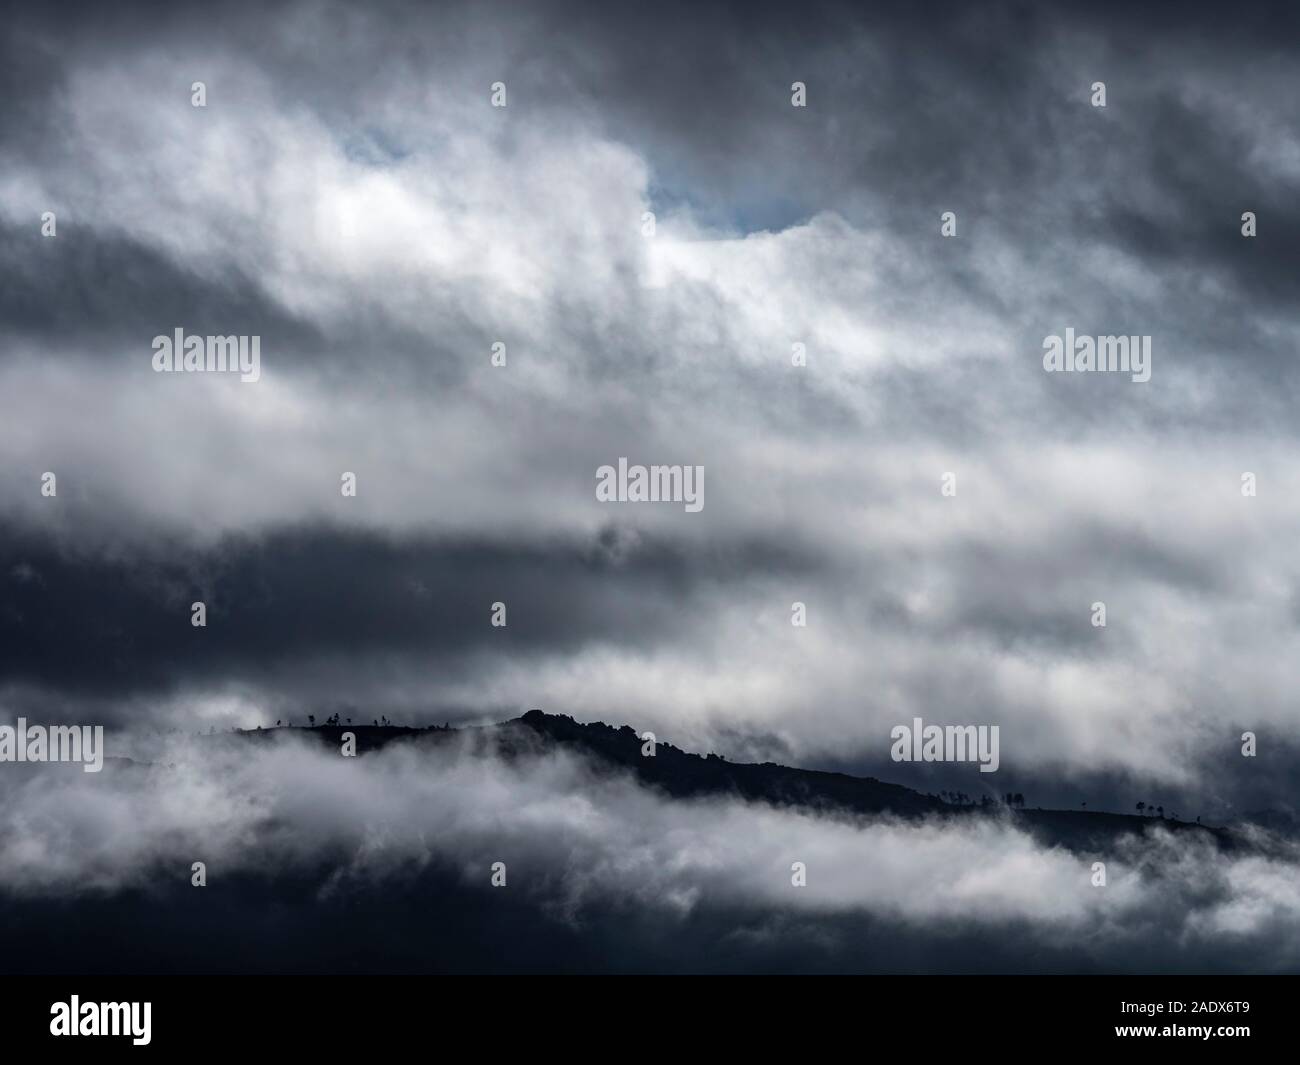 Epic mountainous landscape with dramatic weather conditions and lighting Stock Photo